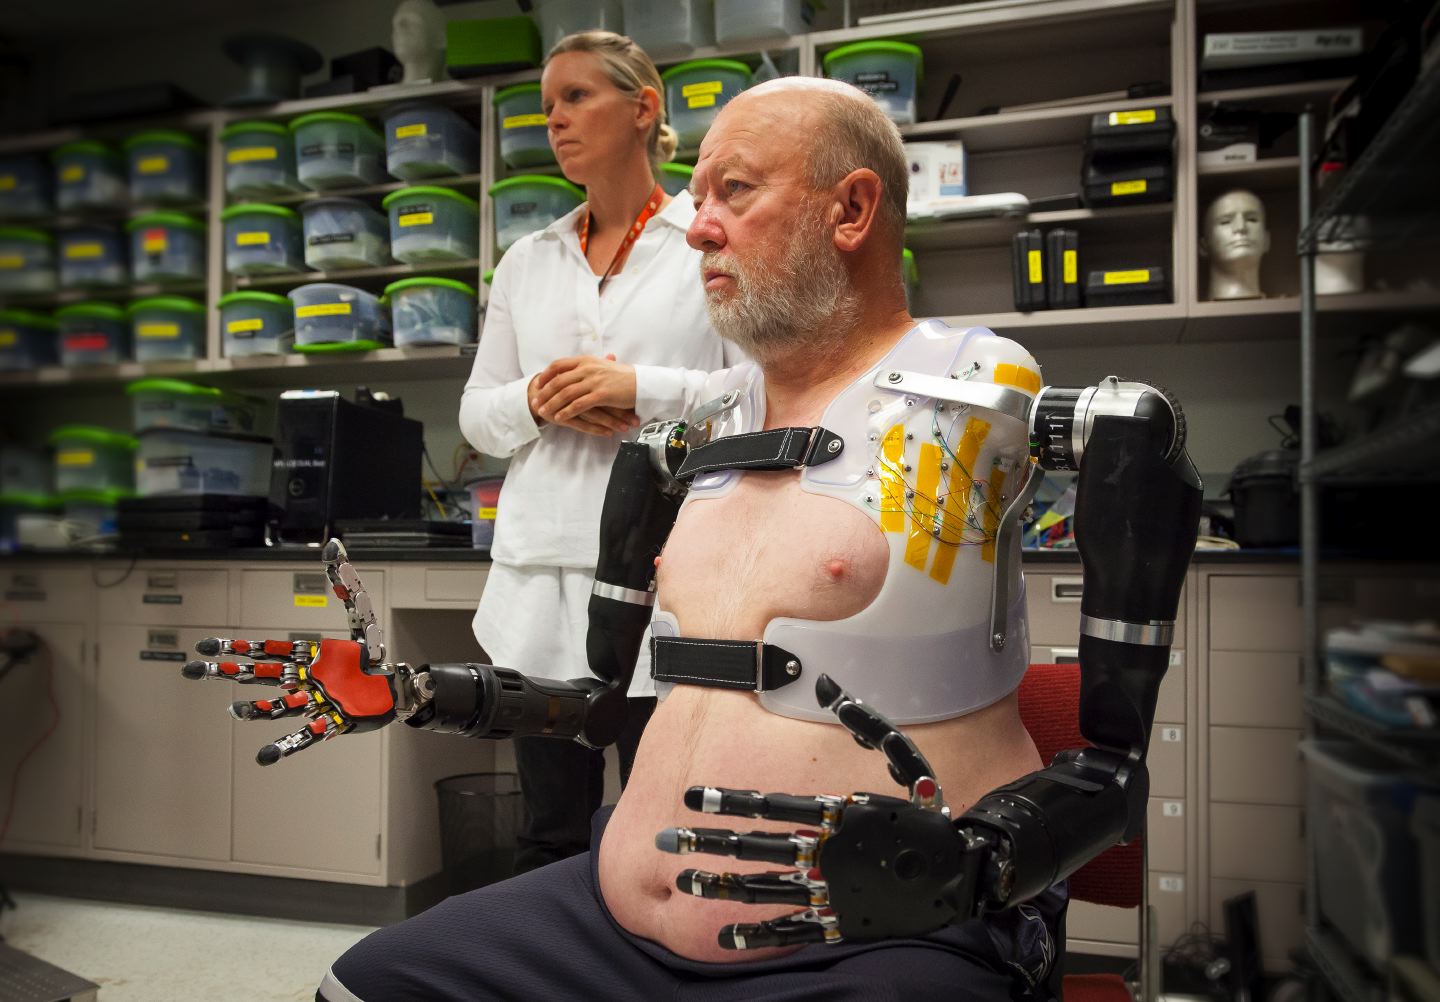 APL prosthetist Courtney Moran looks on as Les Baugh tests out the Modular Prosthetic Limbs